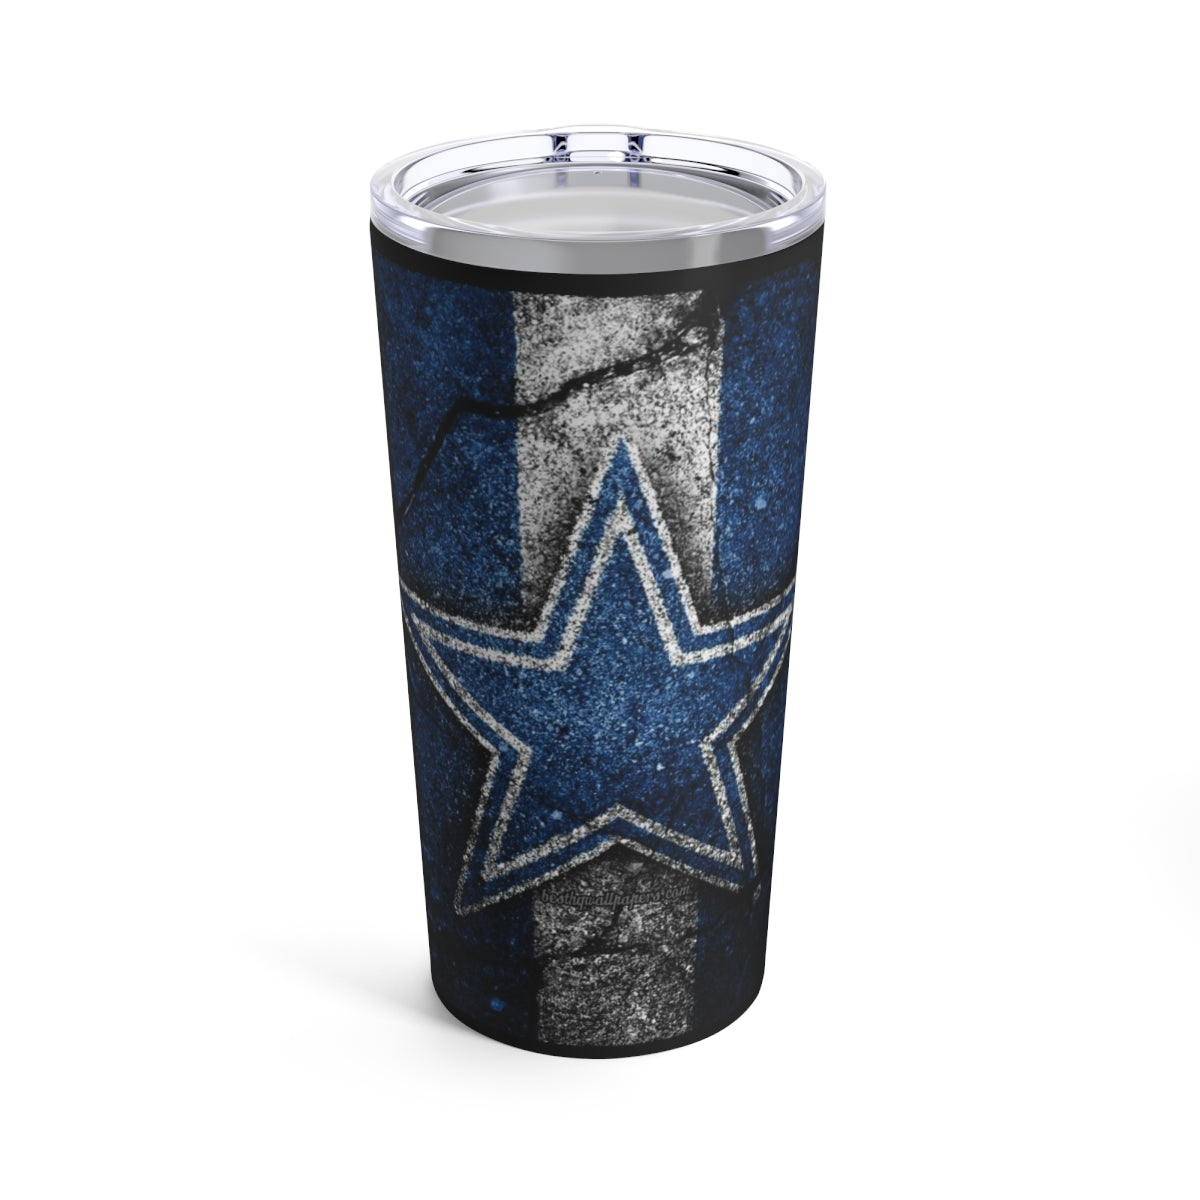 Pro Sports Stainless Steel Tumblers and Coffee Cups